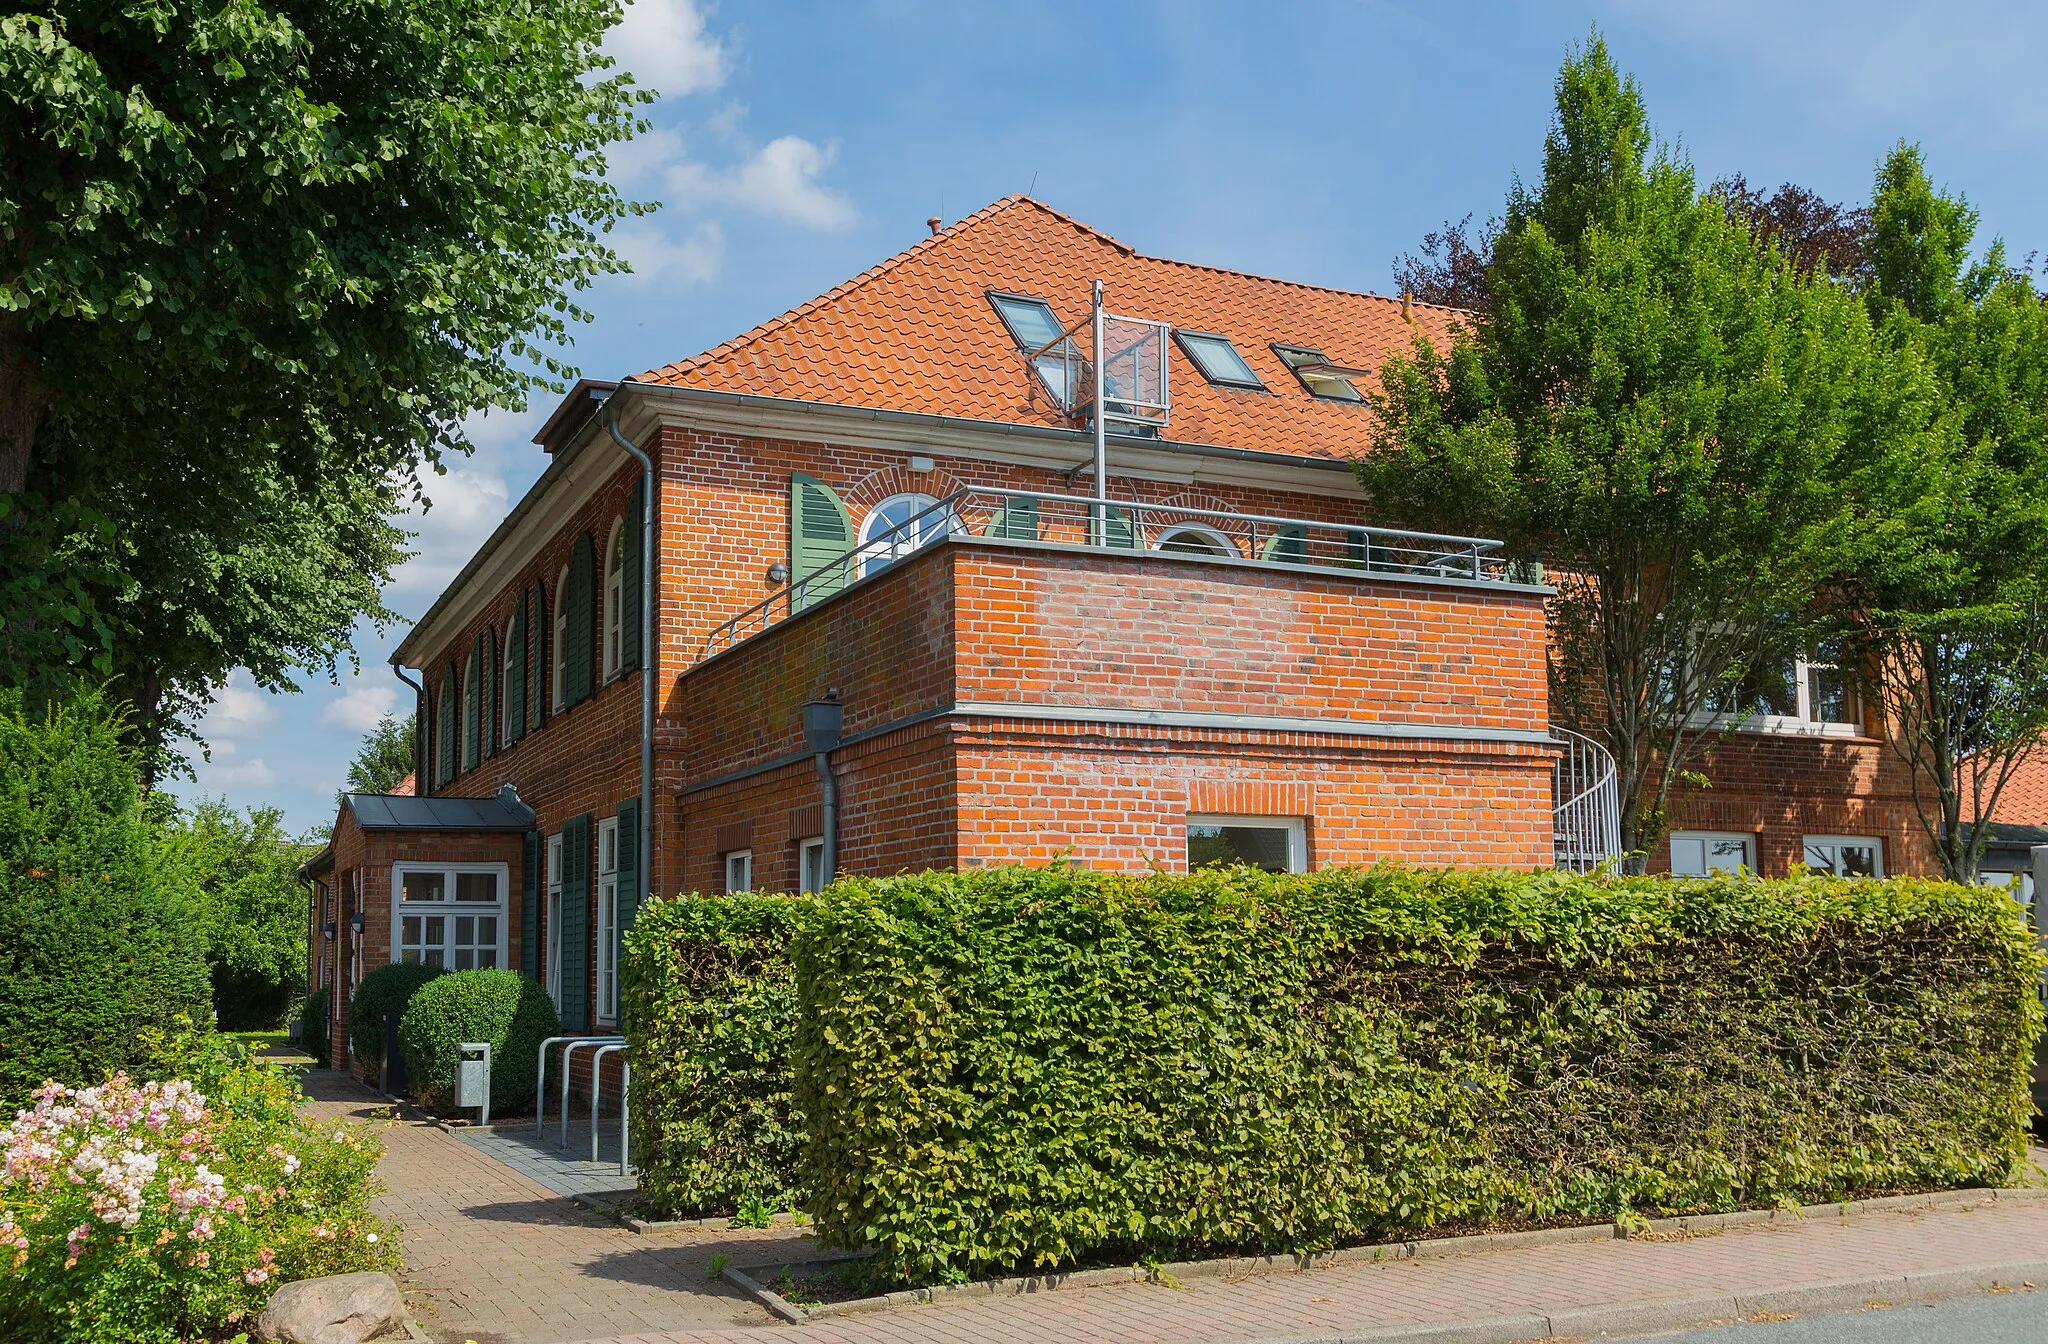 Photo showing: The former Villa Jebsen in Stockelsdorf, Kreis Ostholstein, Schleswig-Holstein, Germany. Nowadays a community centre including the public library and the youth club.